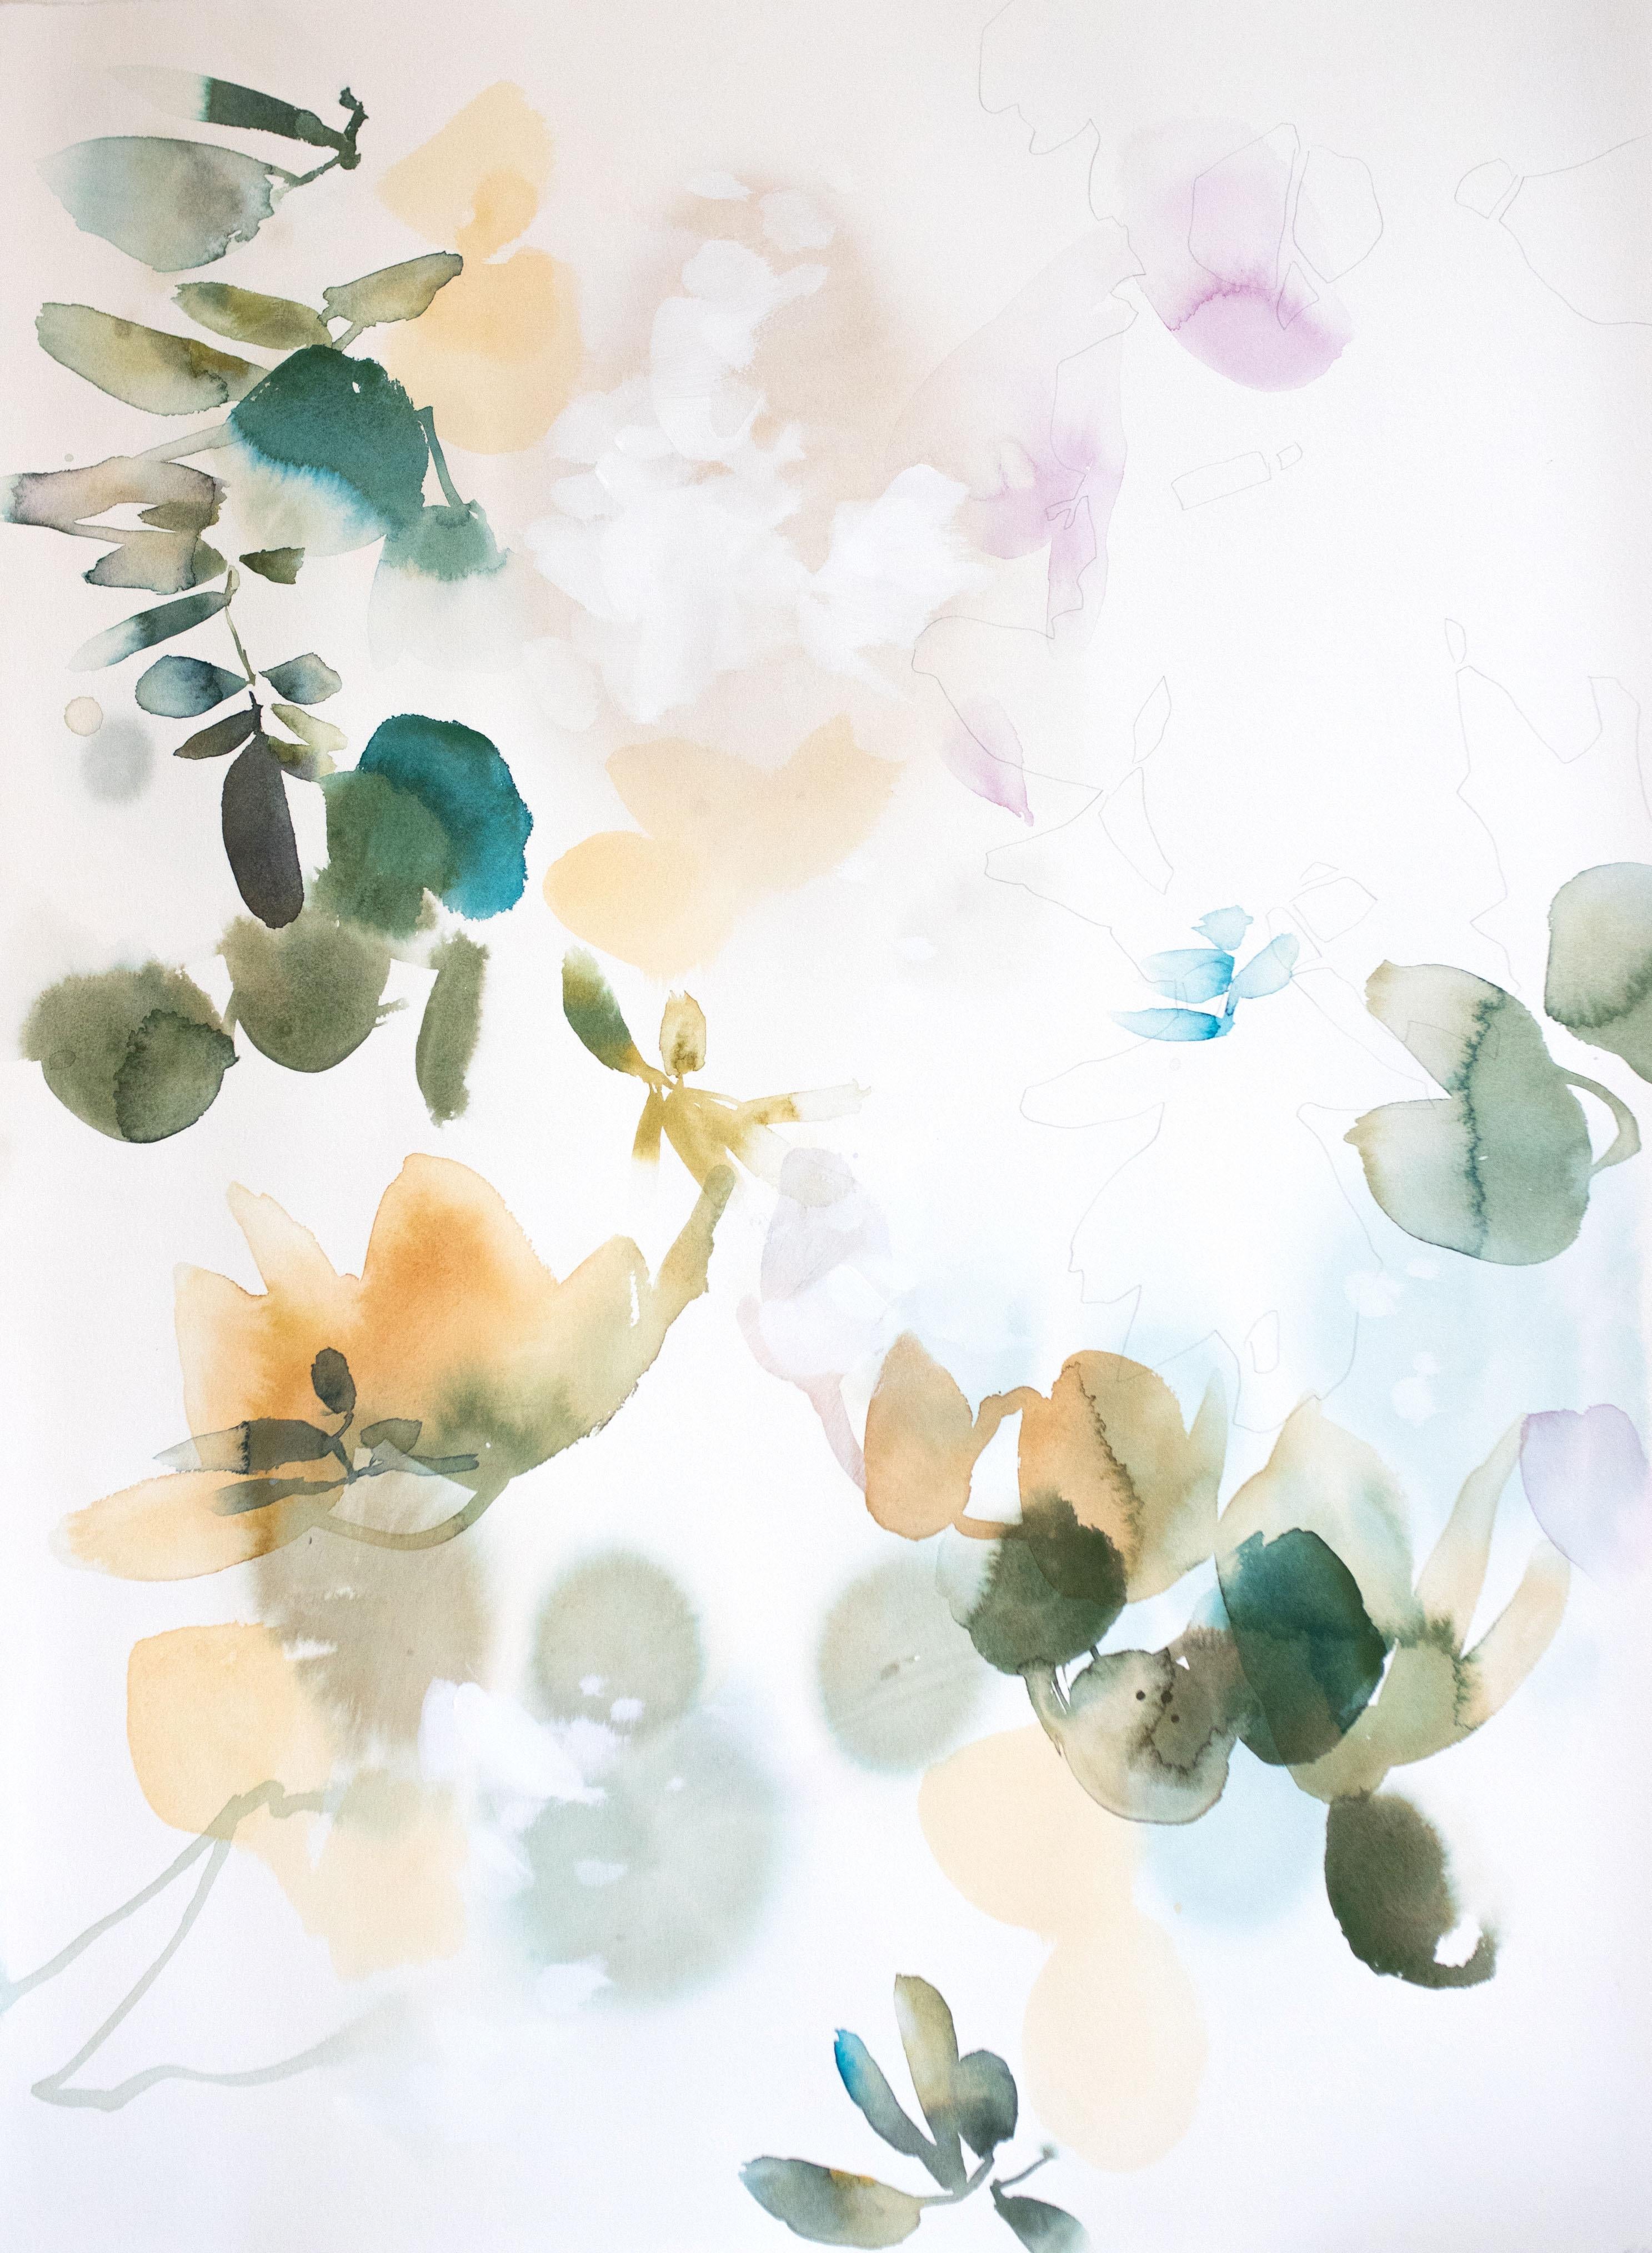 Elise Morris
Certain Rarity 3, 2019
acrylic and graphite on paper
30 x 22 in

This delicate painting on paper features abstracted, painterly leaves and floral imagery in shades of blue, green, and pink.

"For me, painting is an intuitive process of